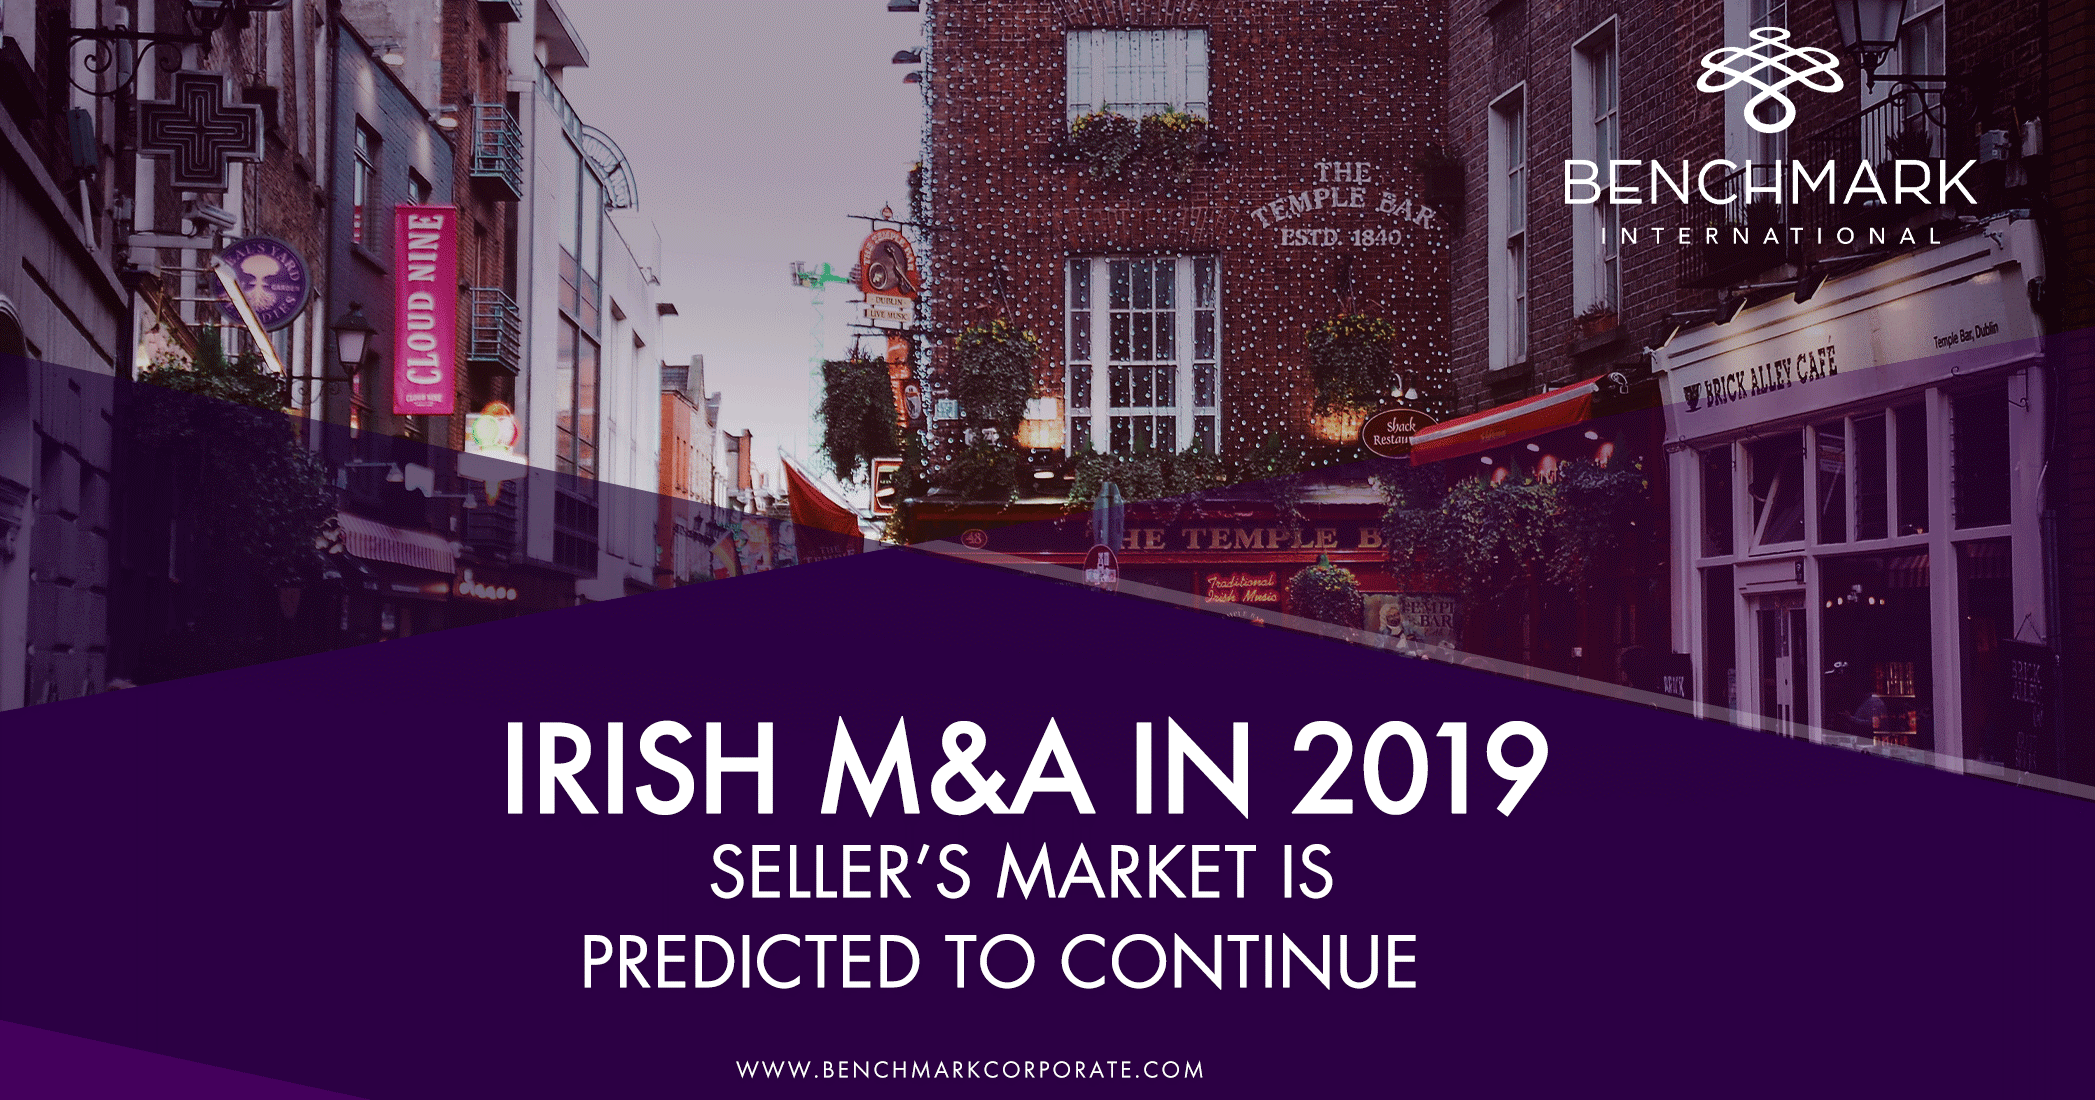 Irish M&A in 2019 – Seller’s Market is Predicted to Continue